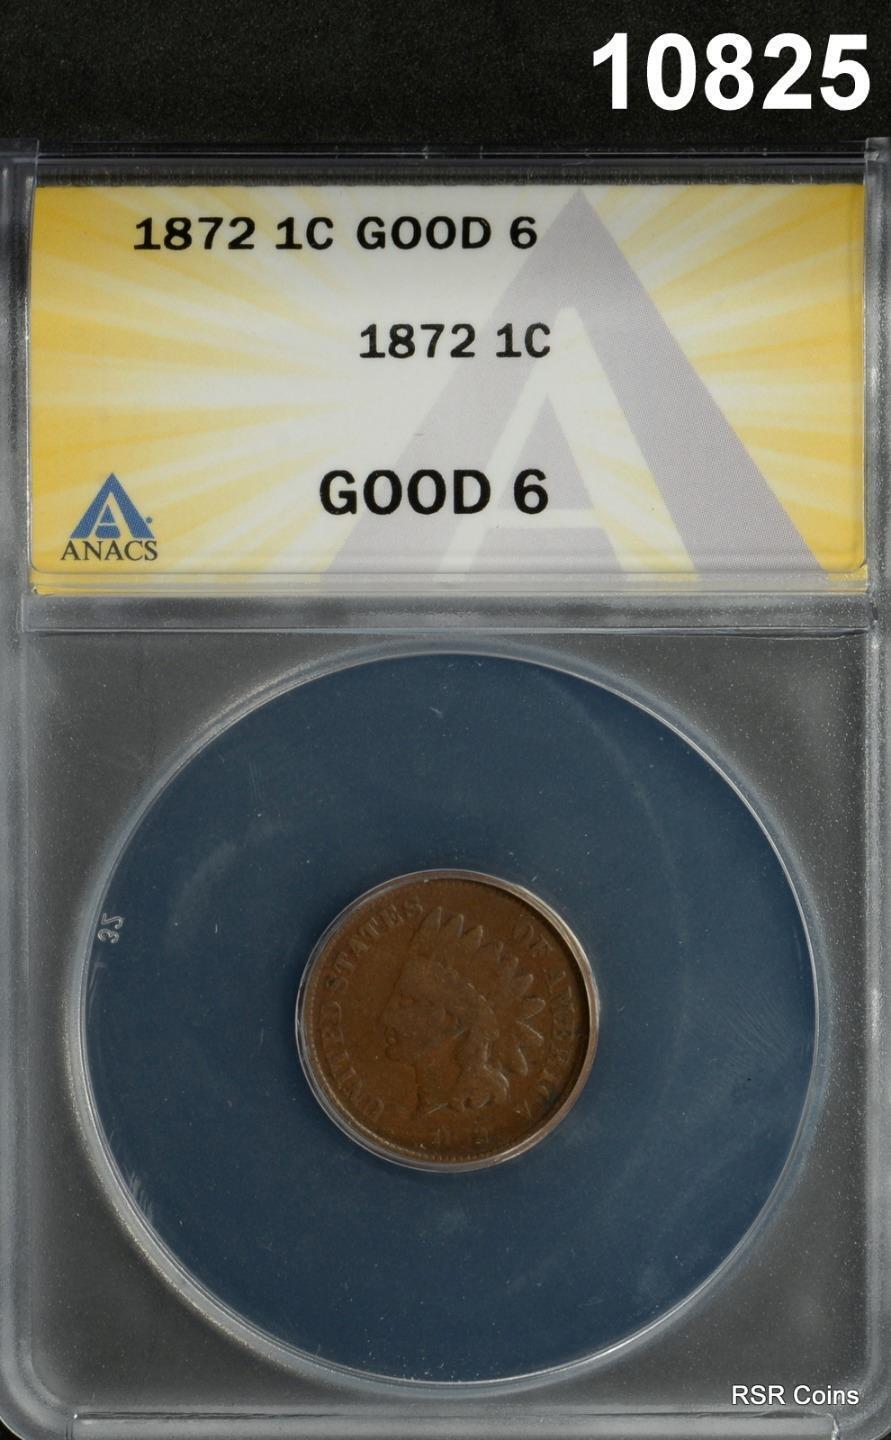 1872 INDIAN HEAD CENT ANACS CERTIFIED GOOD 6 SCARCE DATE! #10825